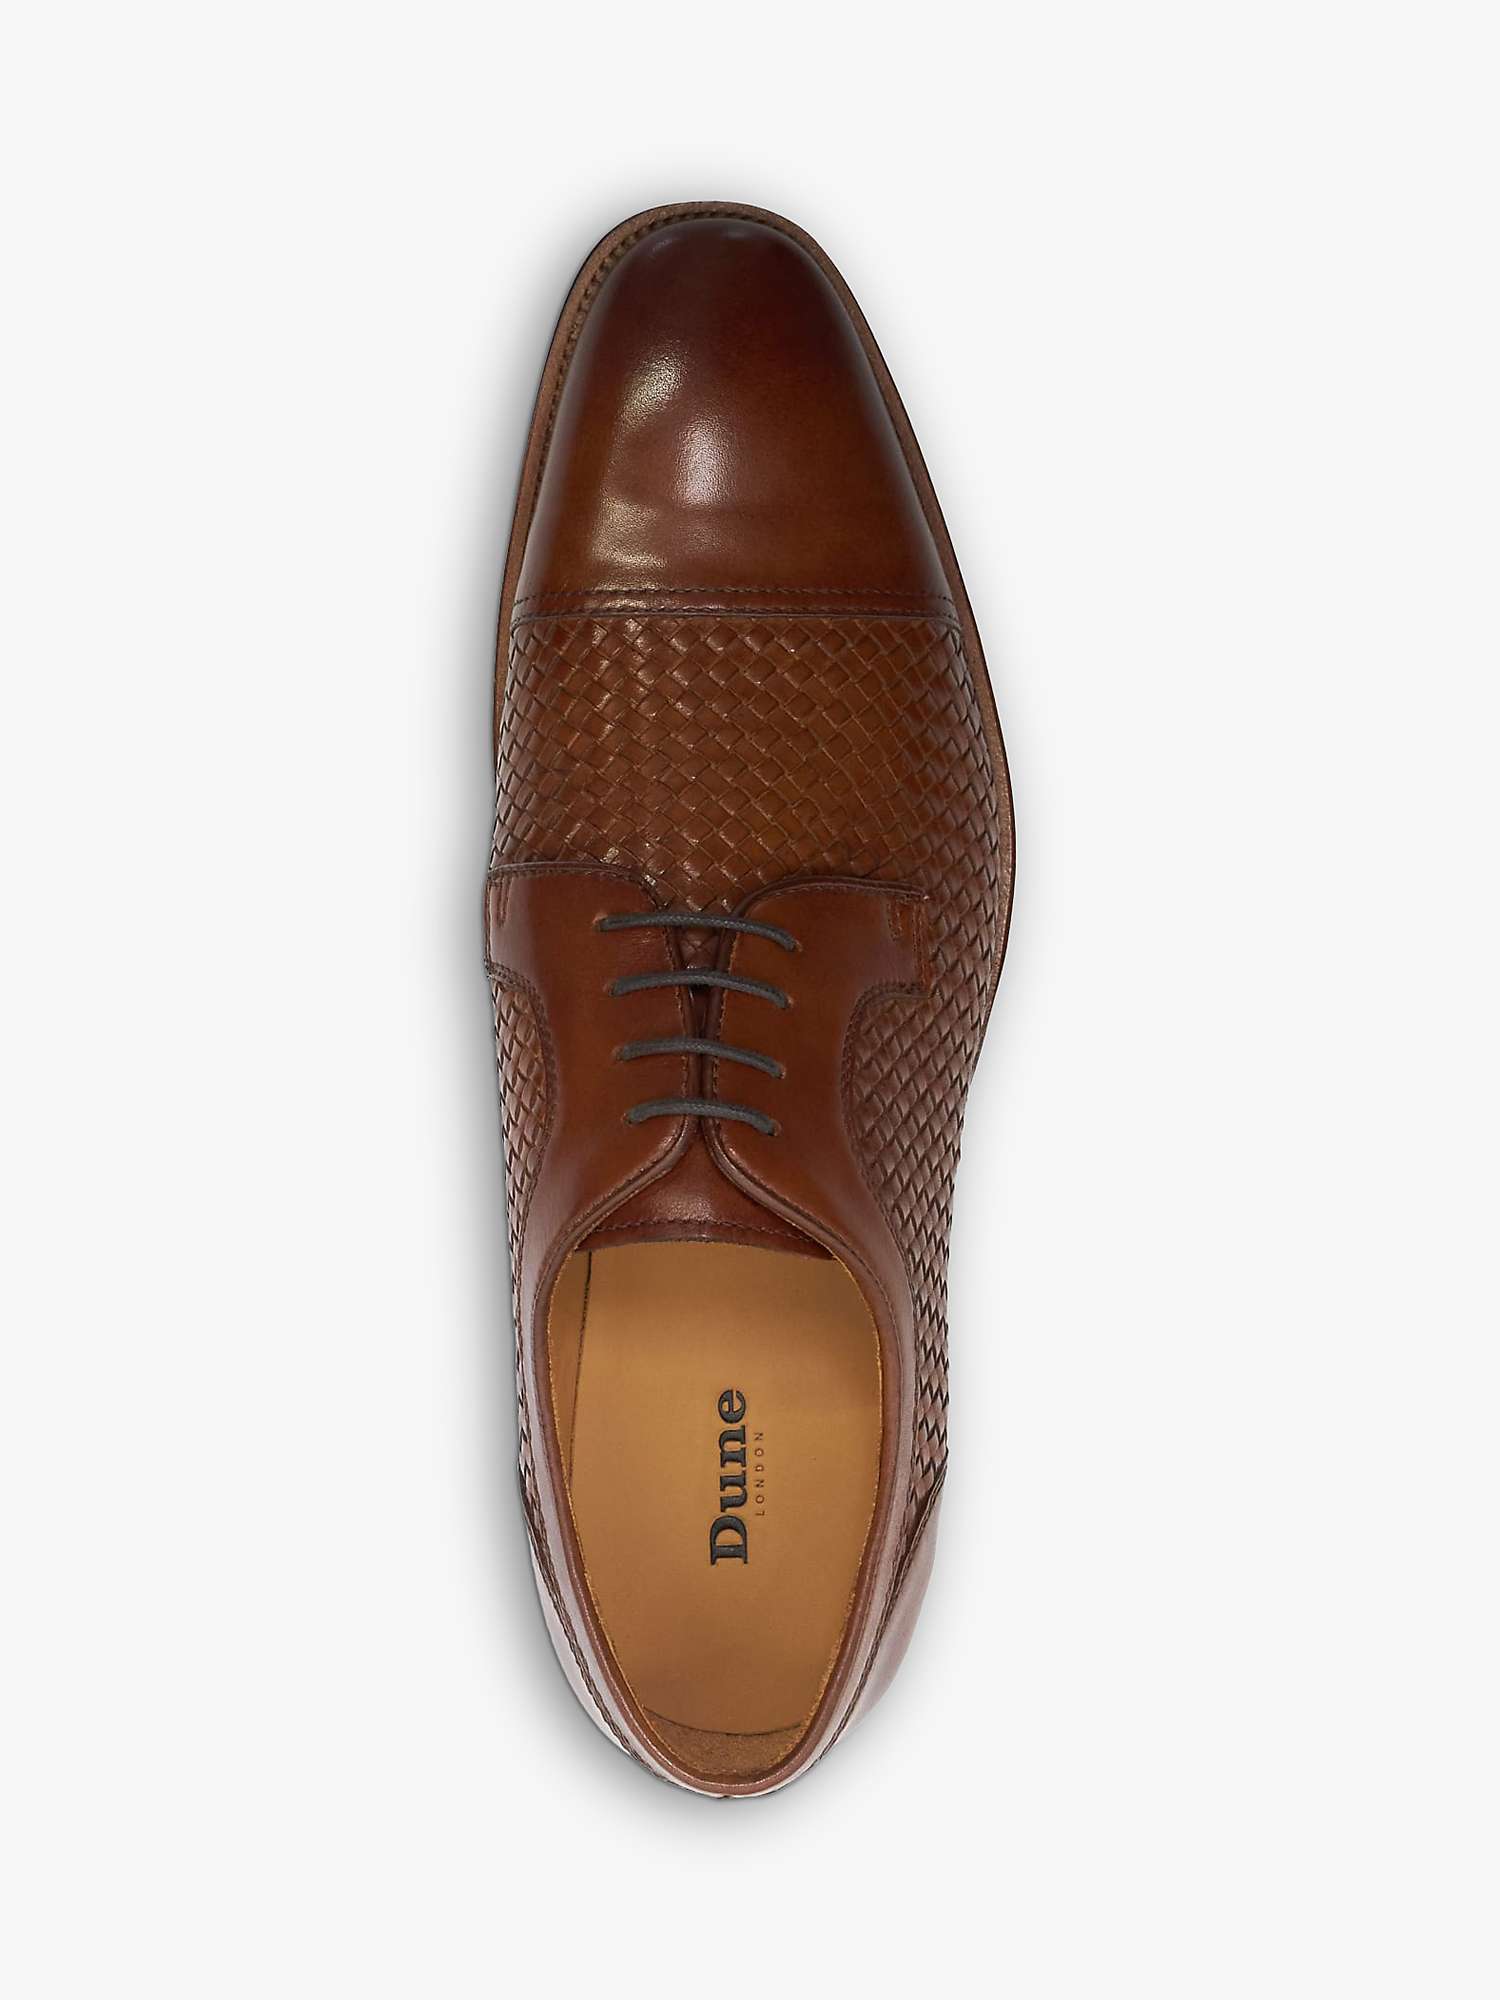 Buy Dune Stimuli Leather Woven Toecap Oxford Shoes Online at johnlewis.com